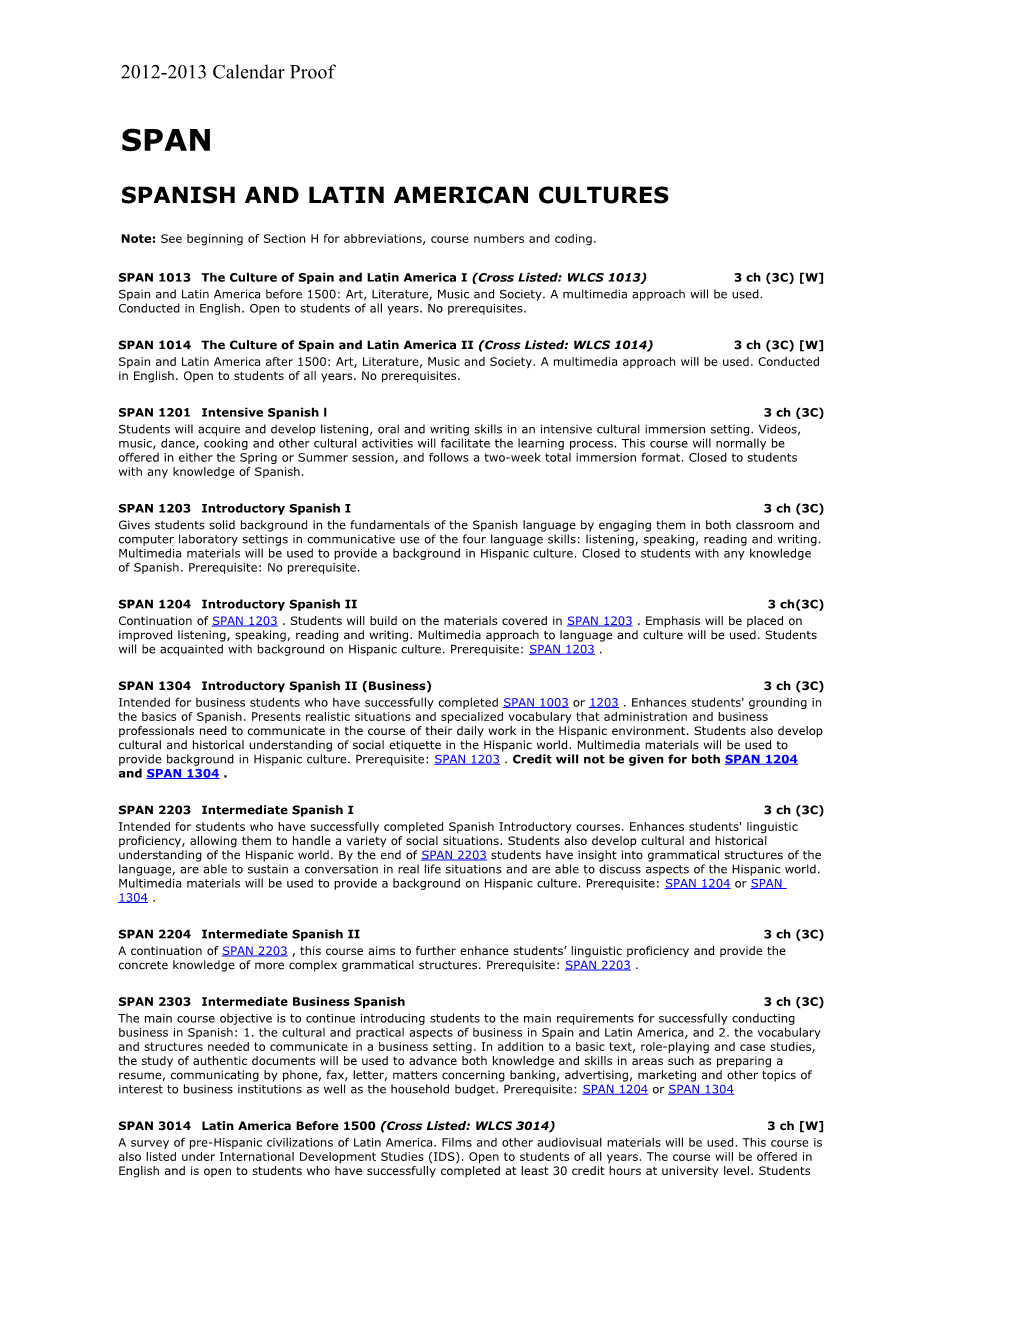 Spanish and Latin American Cultures